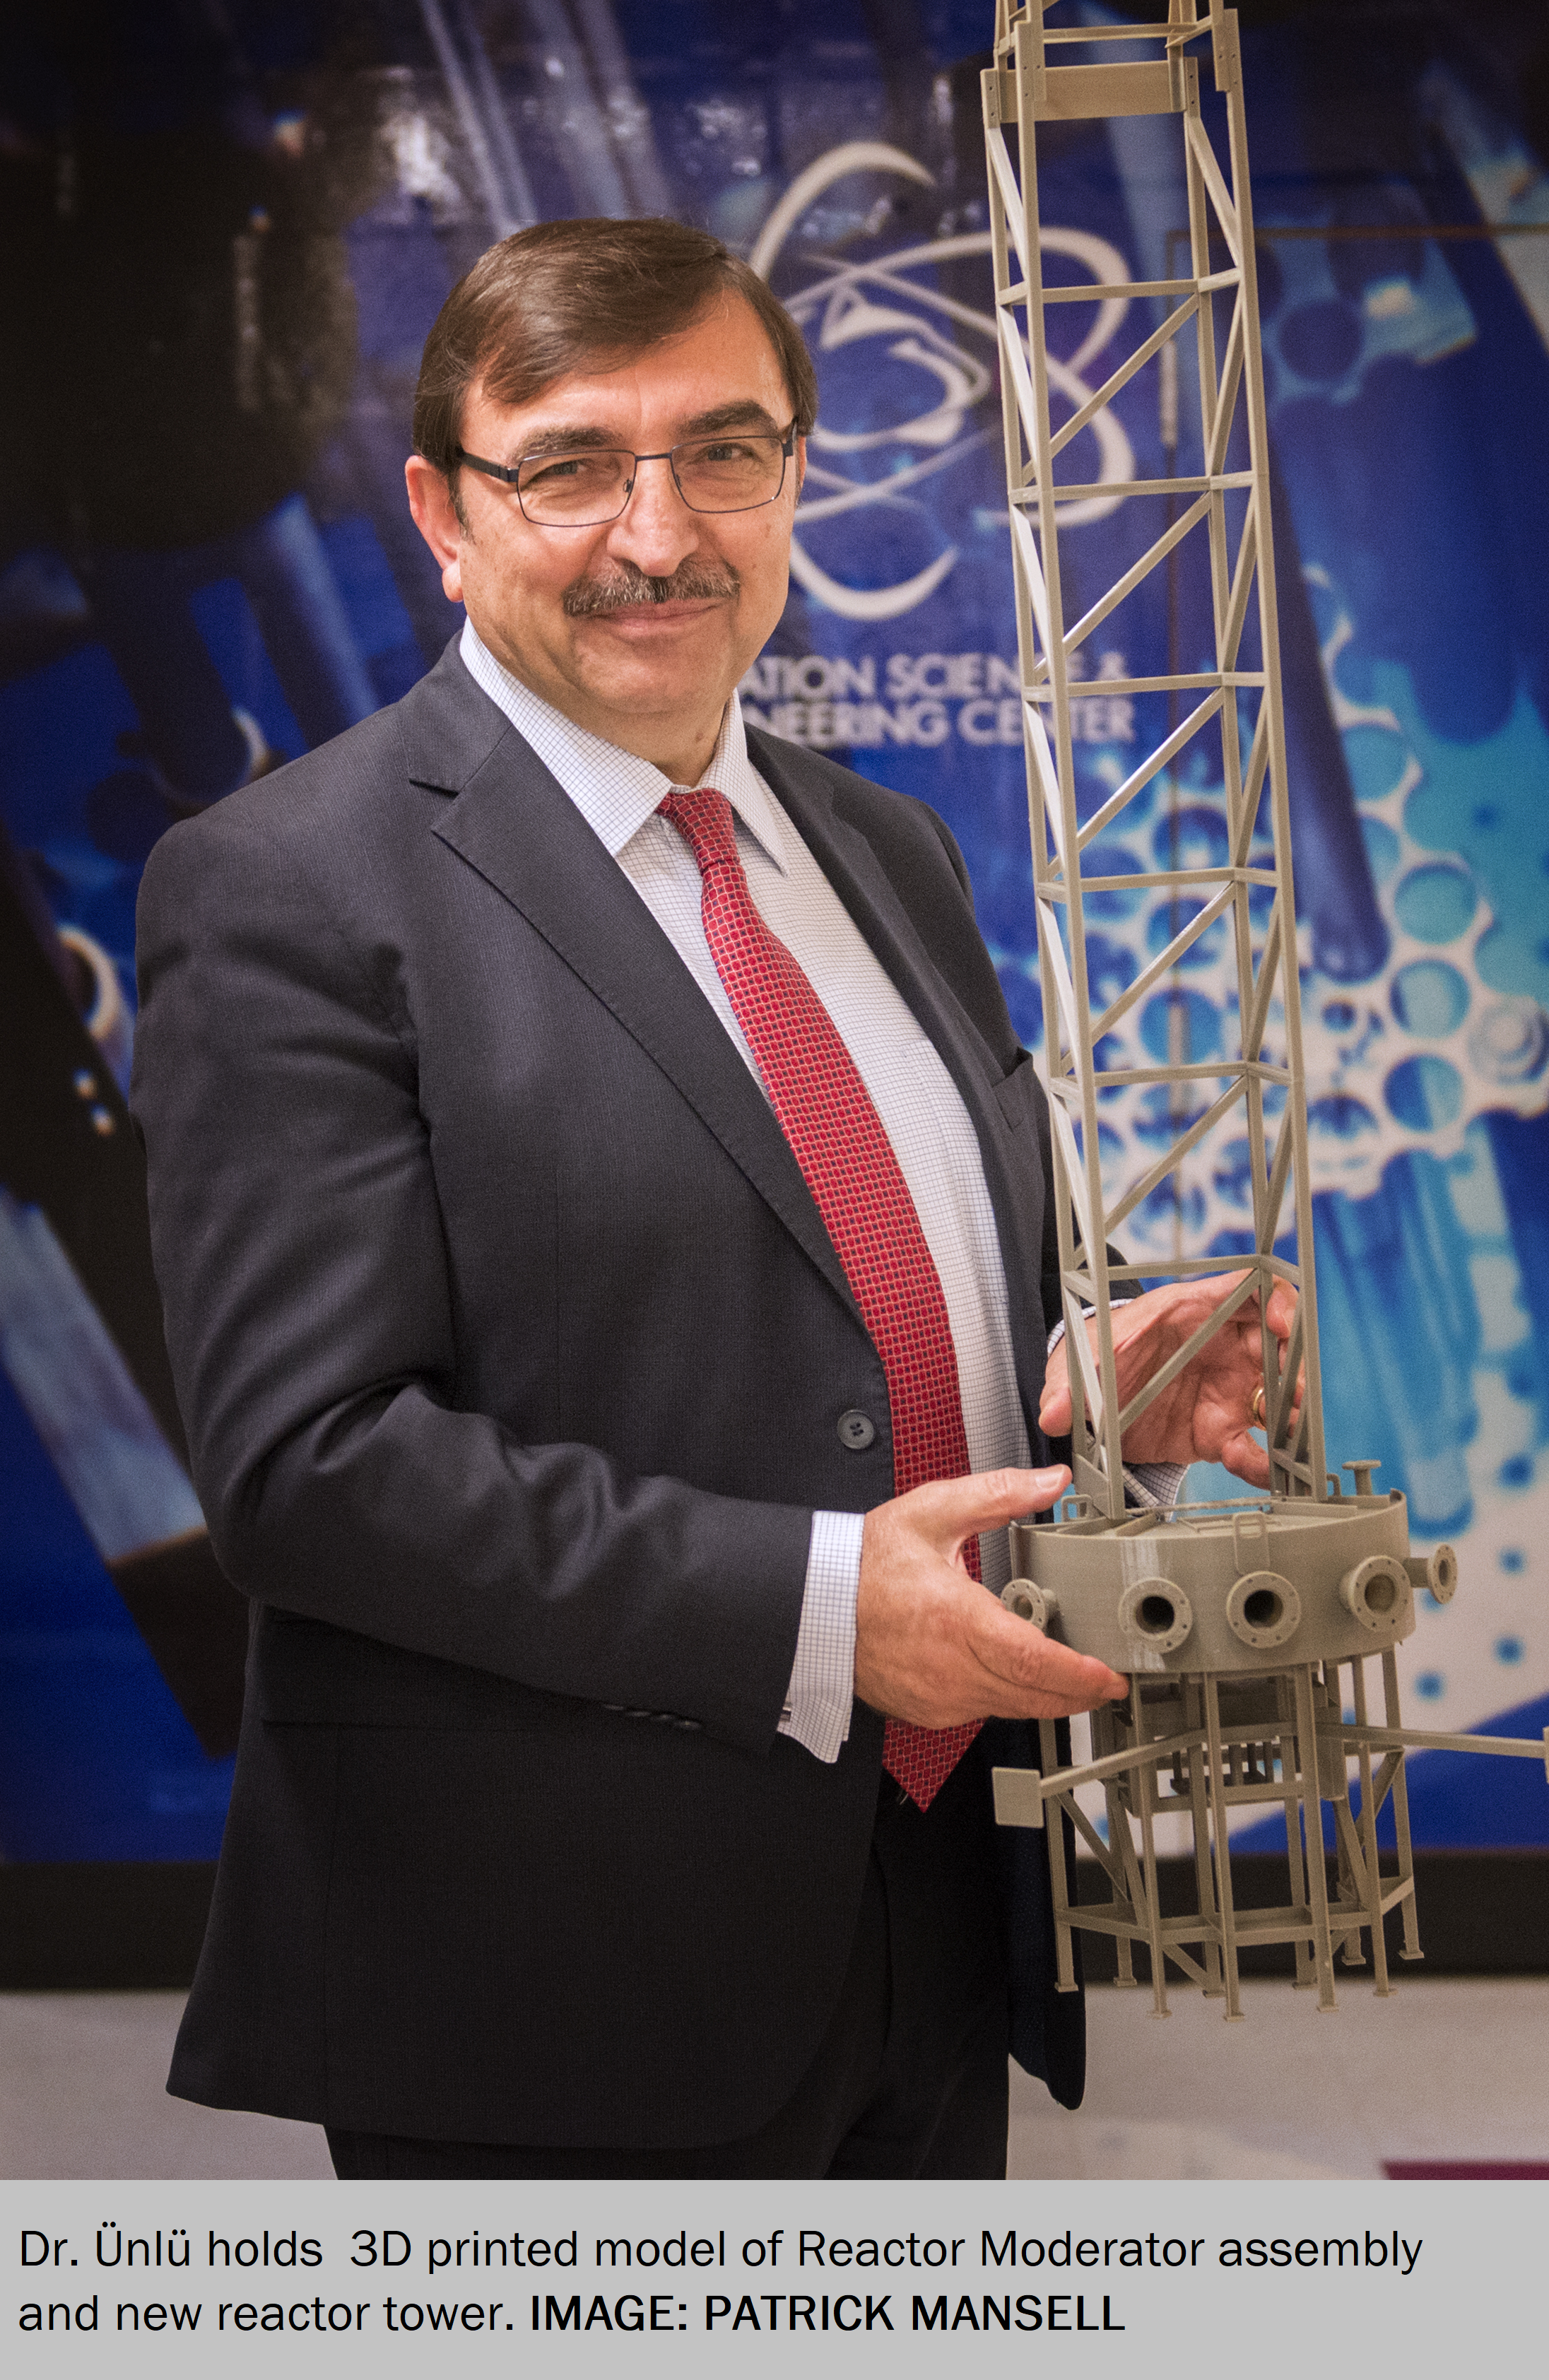 Kenan Ünlü, Director of the Penn State Radiation Science and Engineering Center